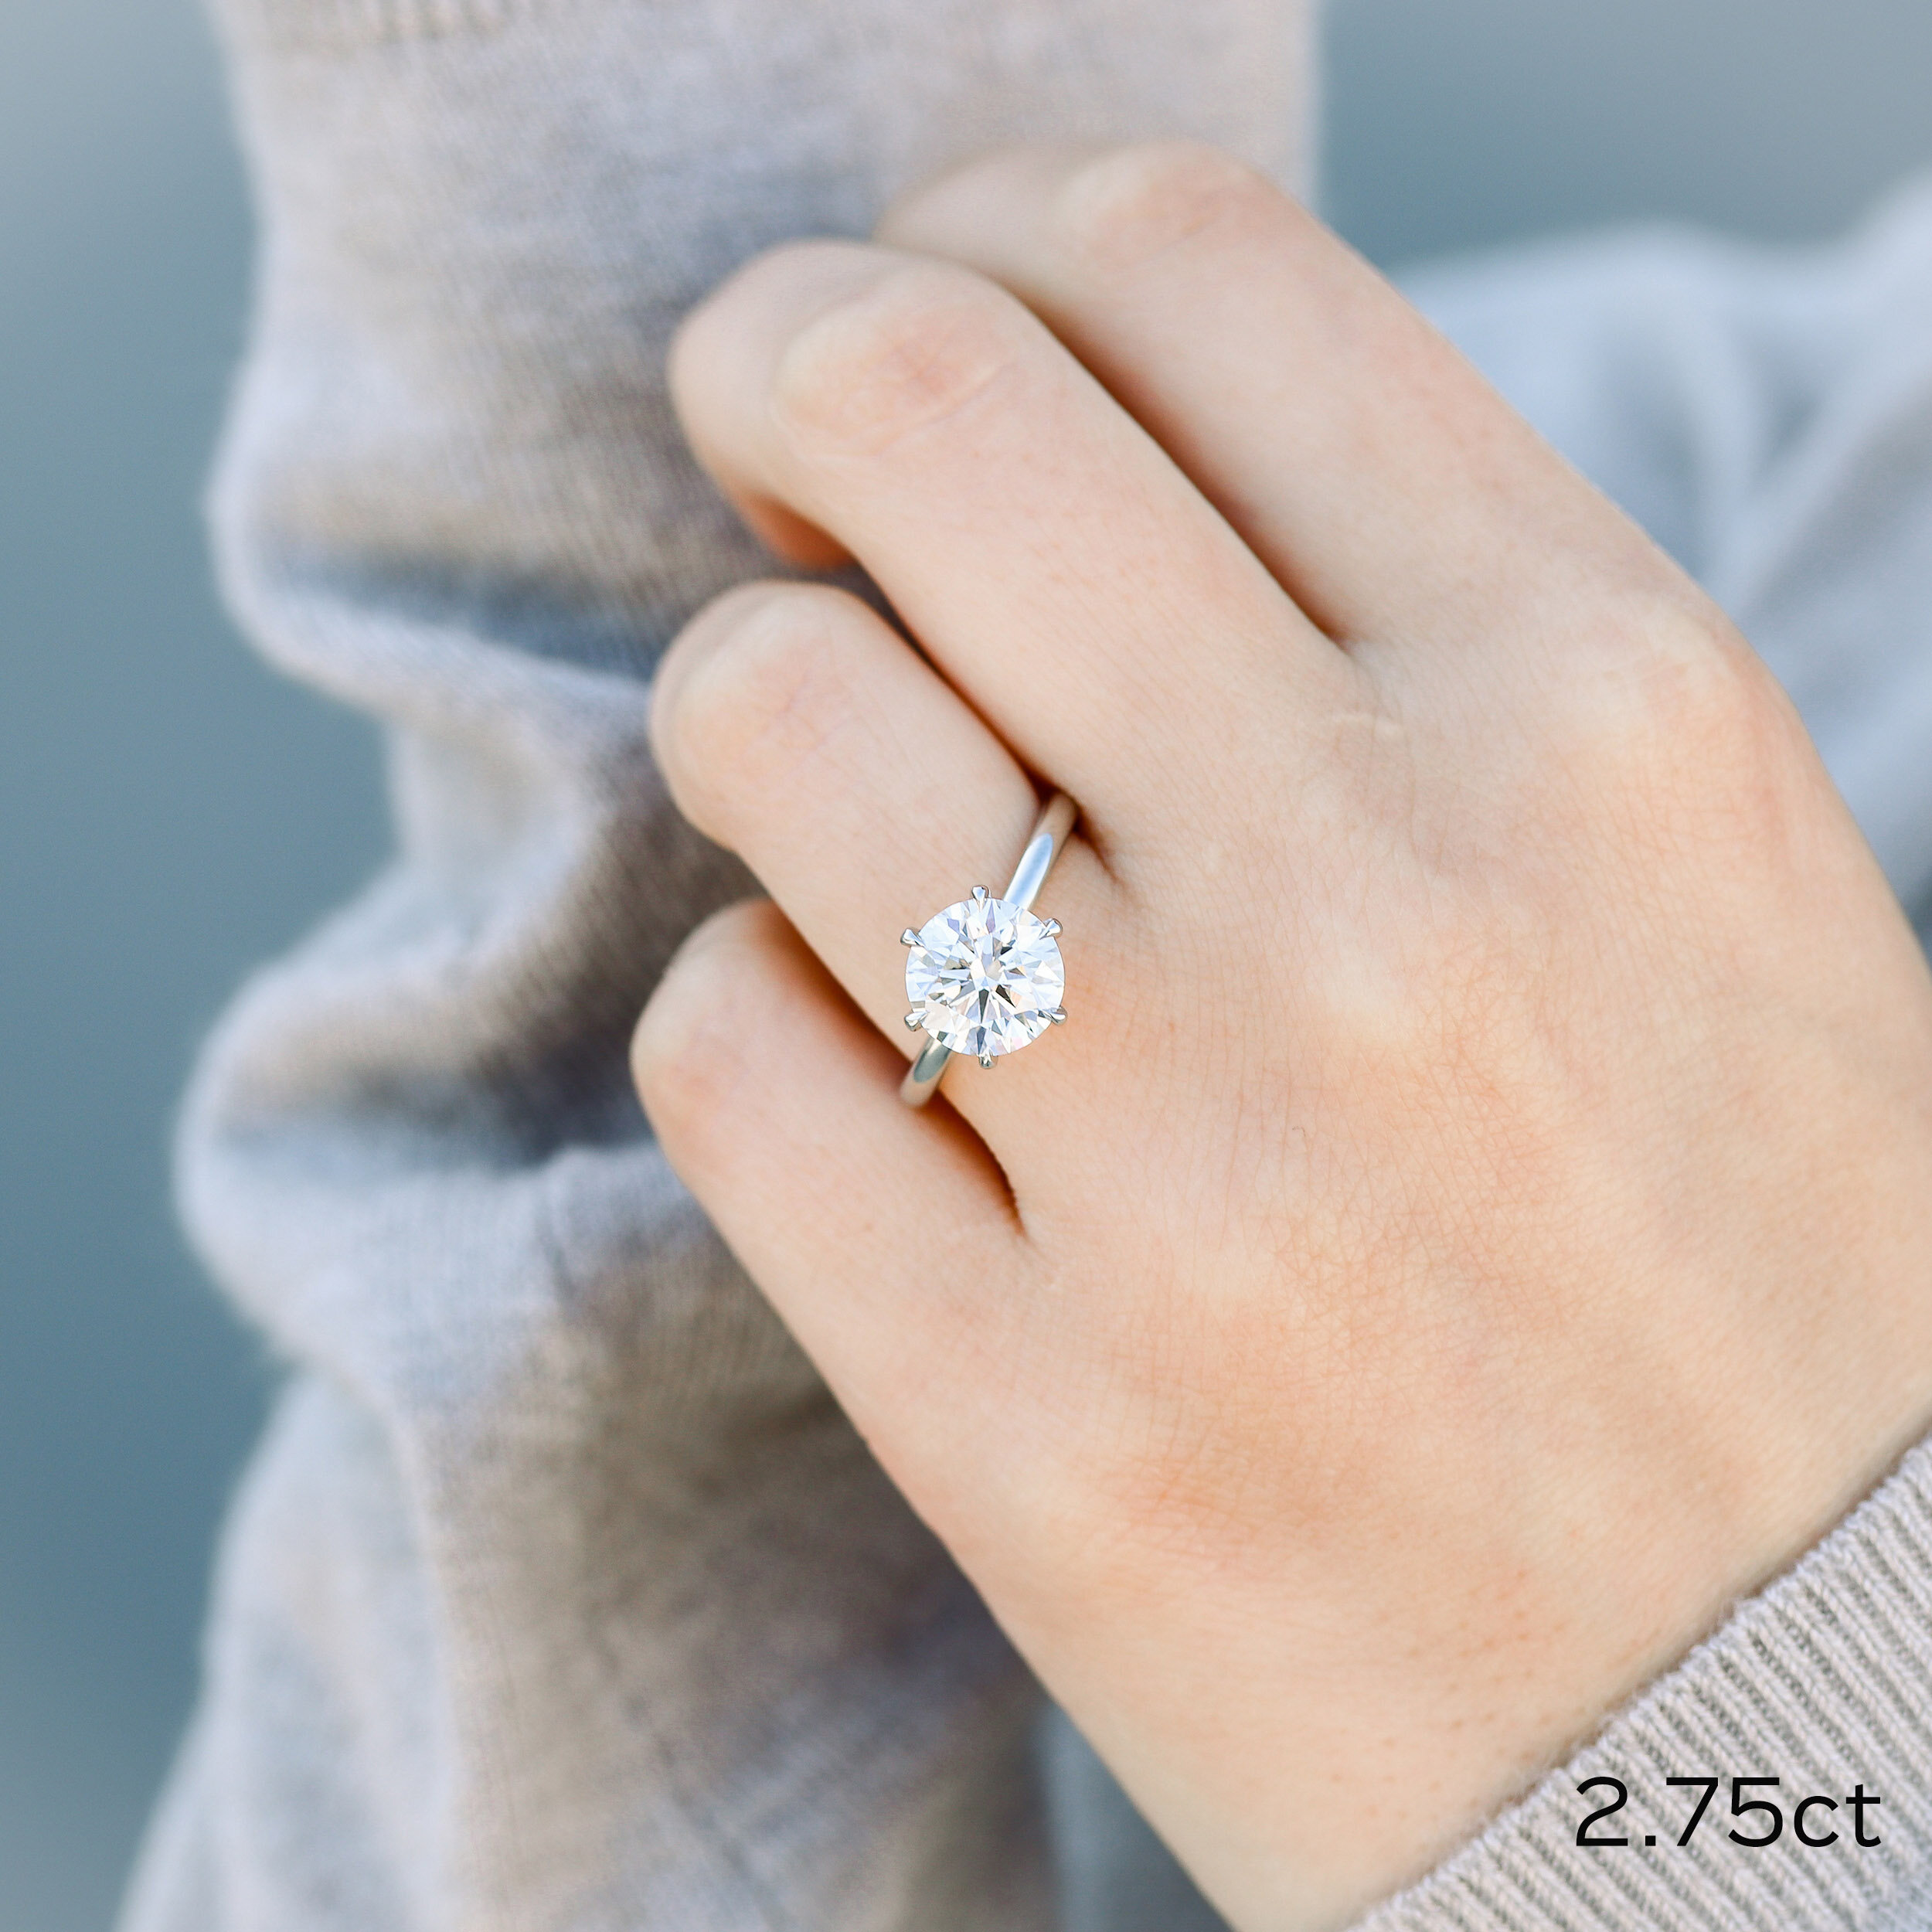 Engagement, Anniversary, or Vow Renewal Ring? Choose a 6 Carat Diamond |  Miss Diamond Ring